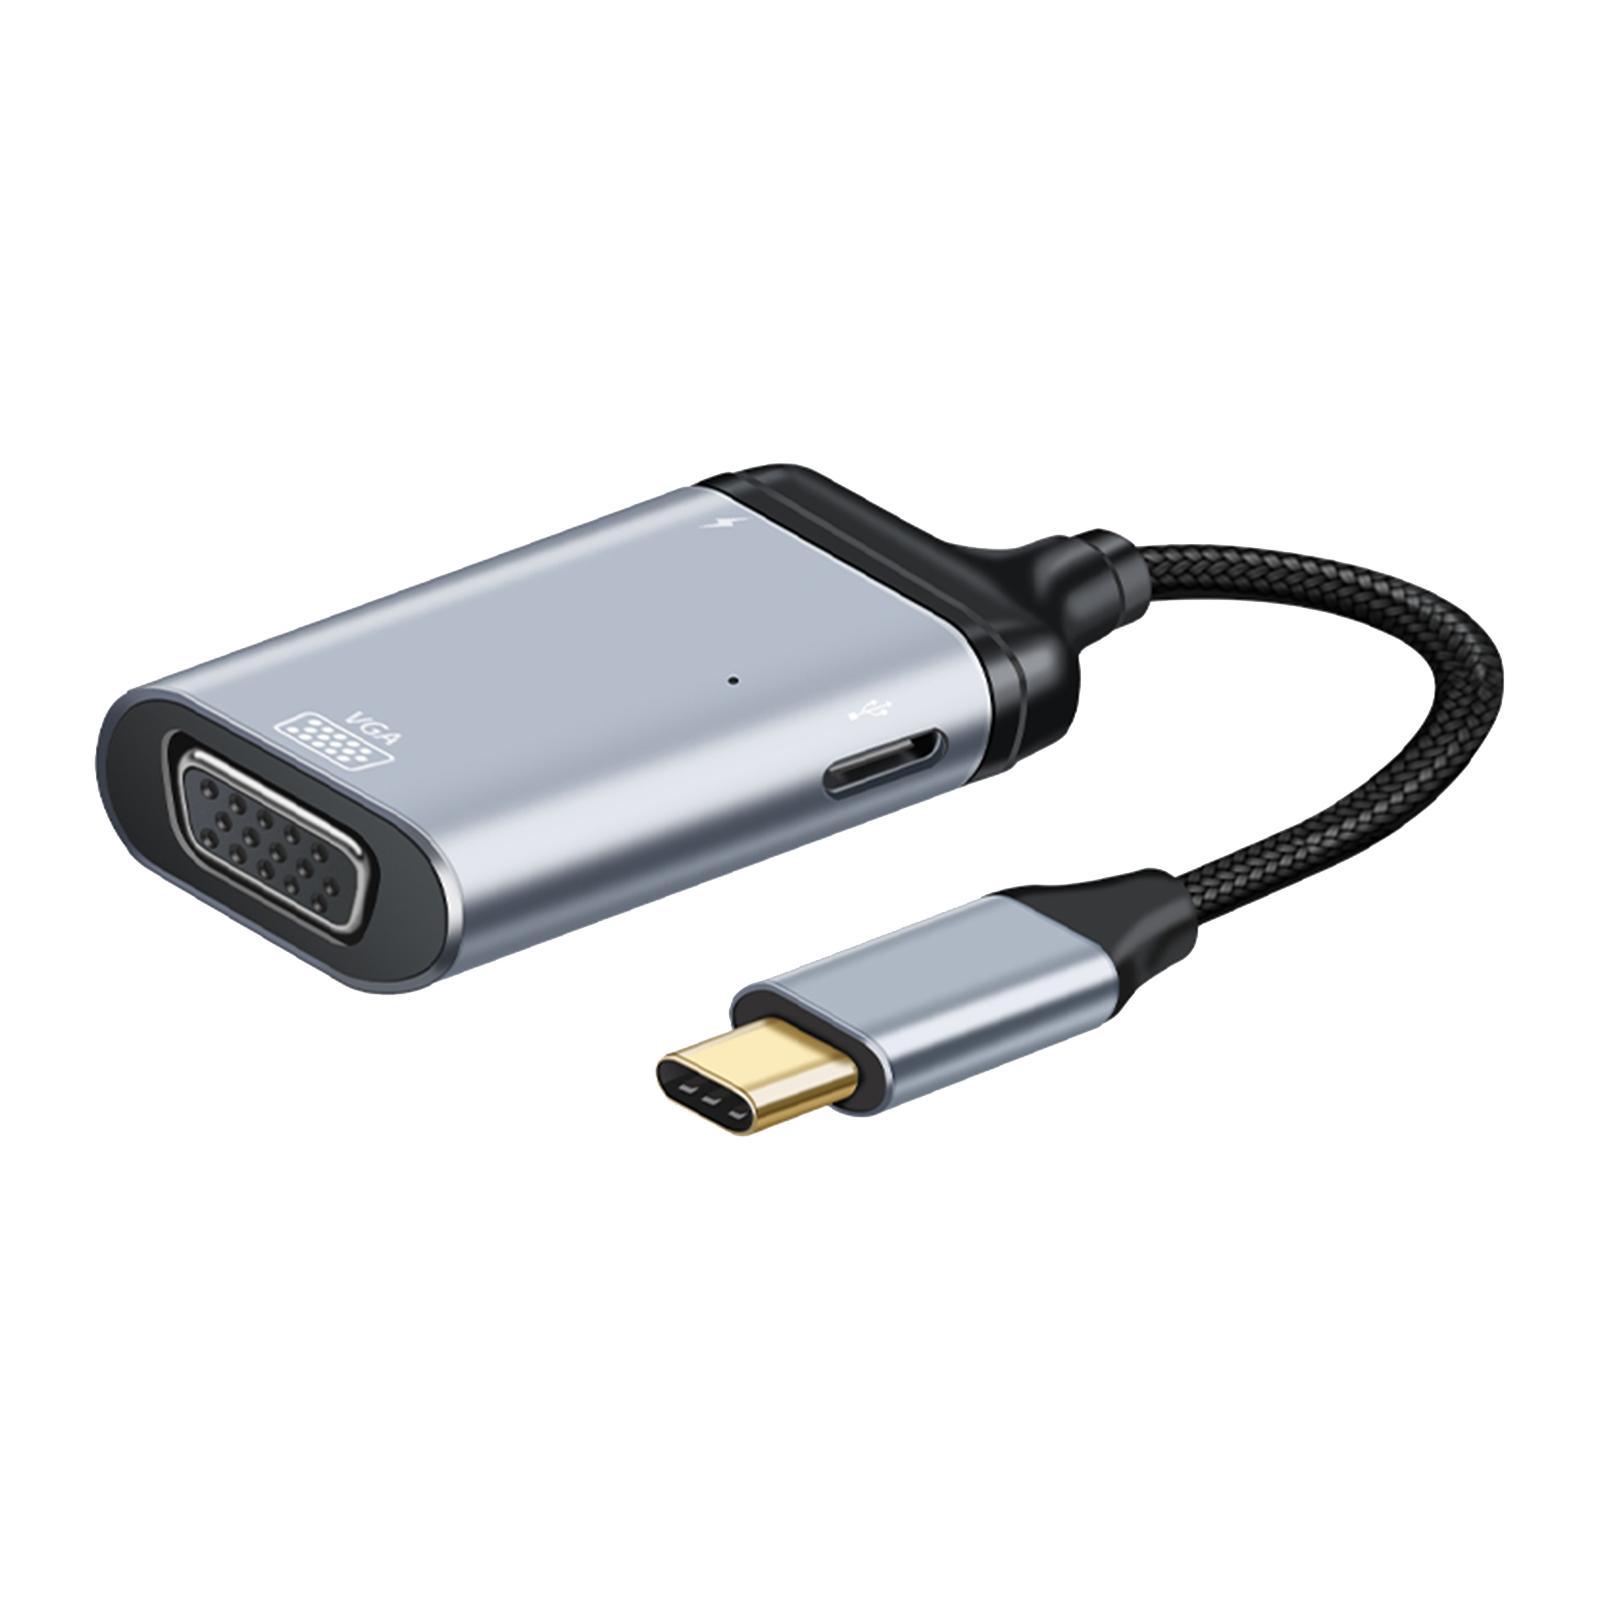 USB 2.0 Type C to  Adapter  for  Pro  to USB C Adapter